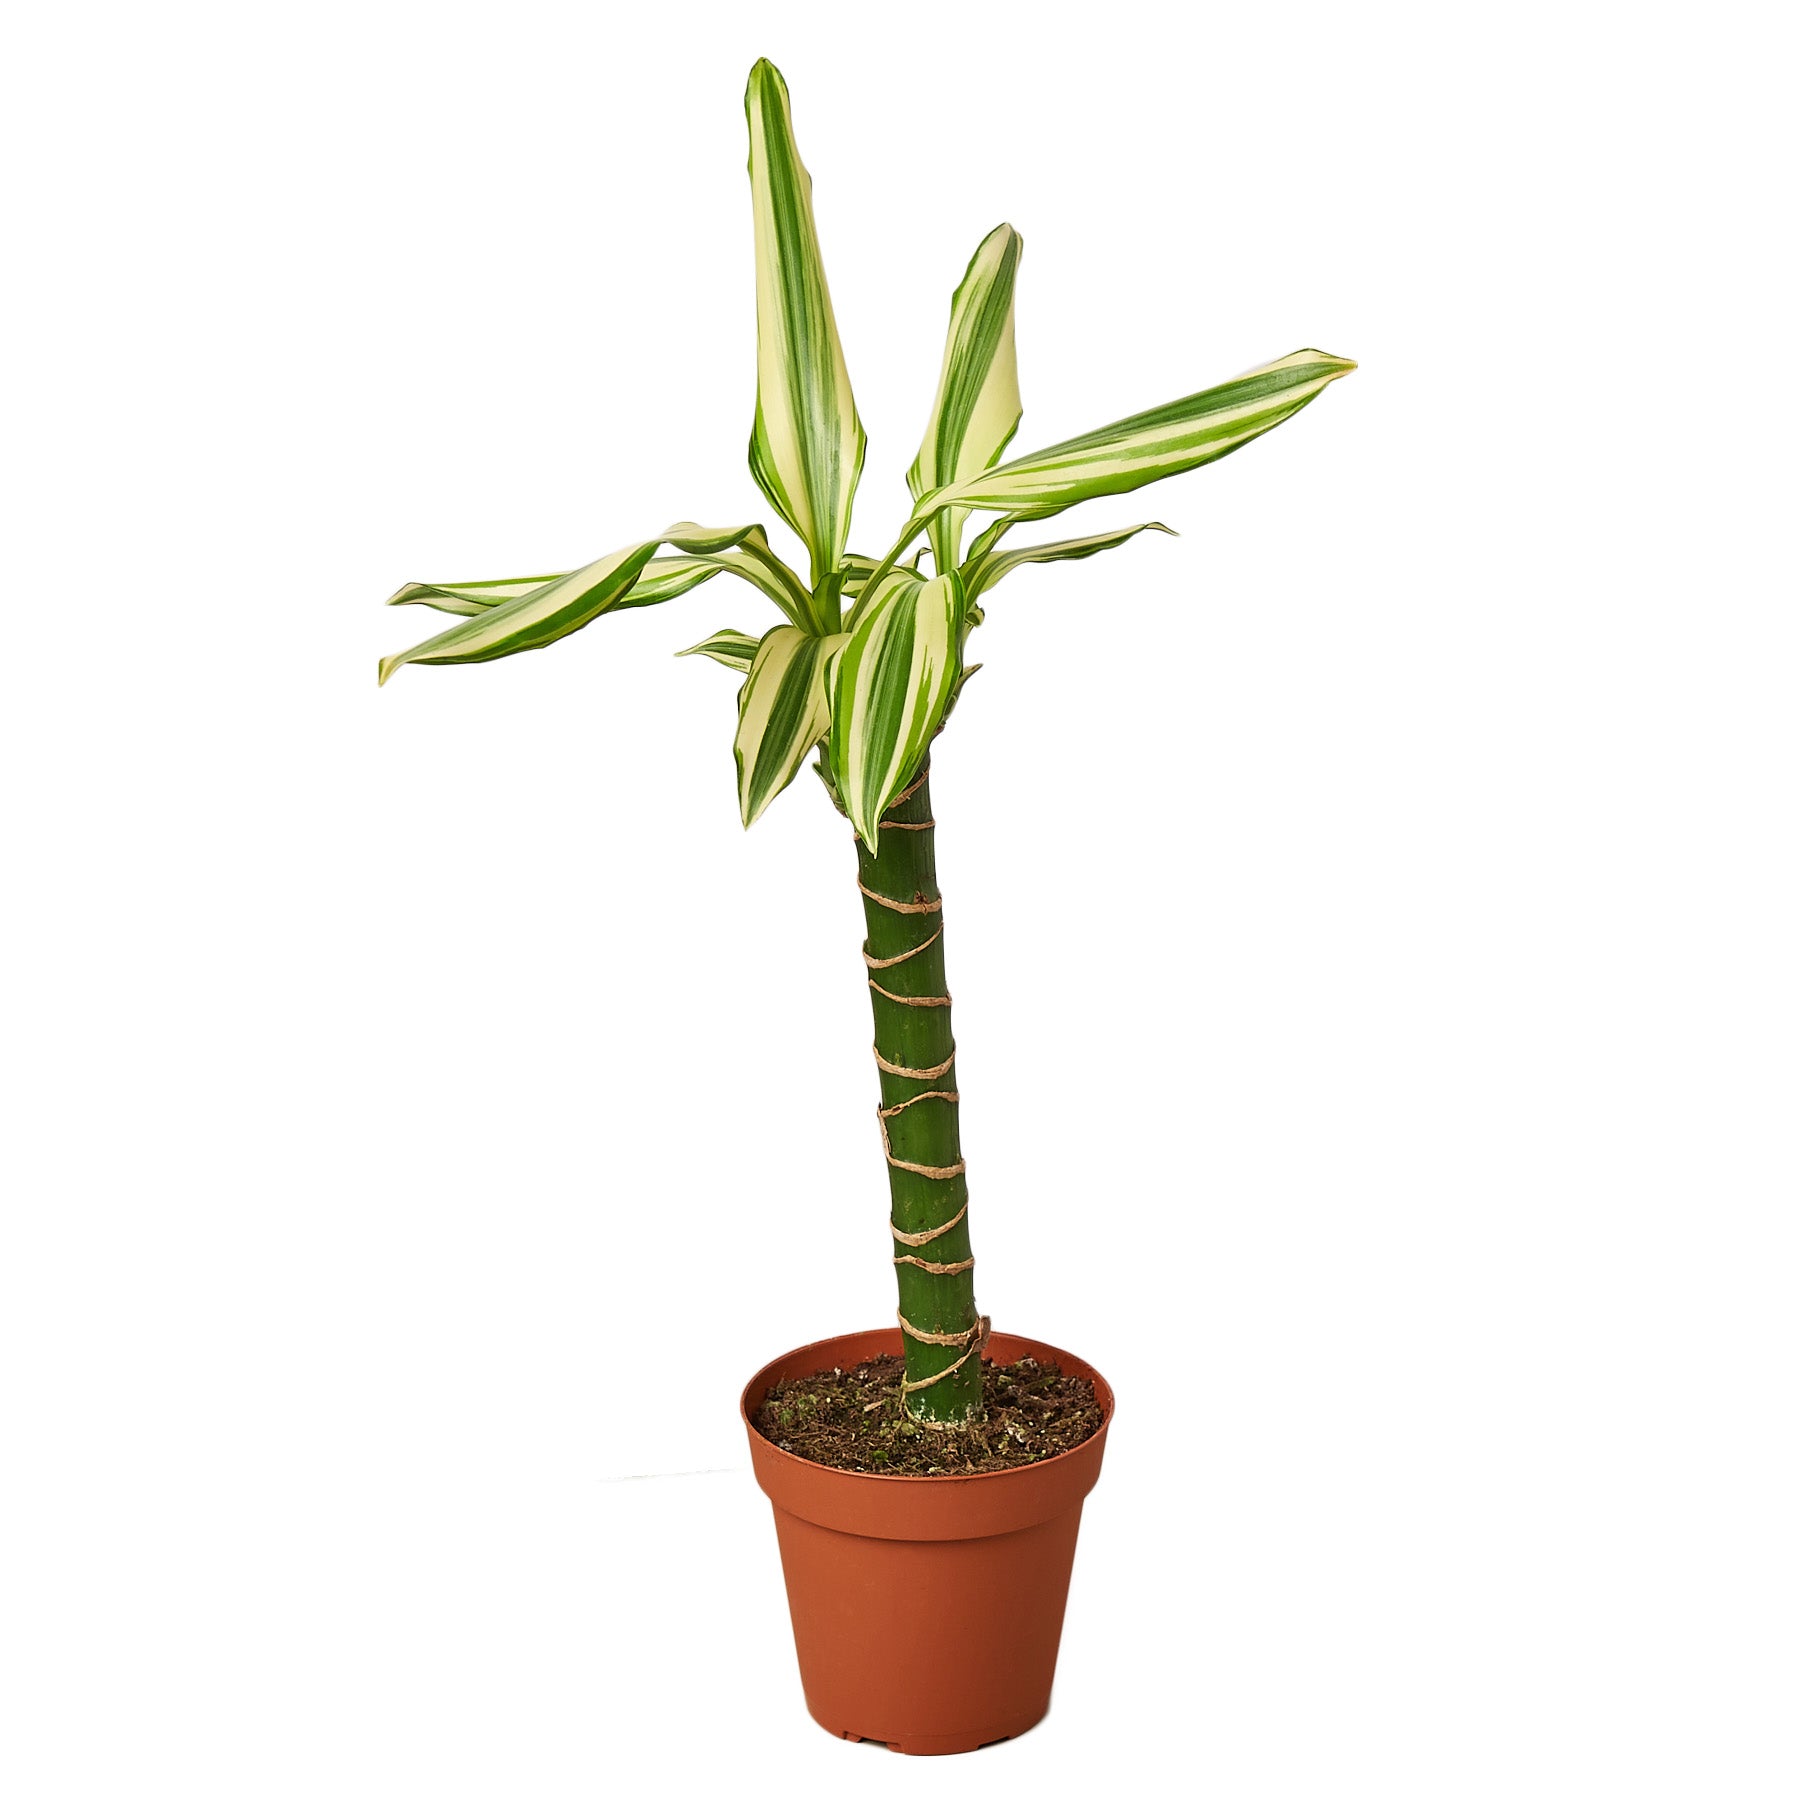 A potted plant with a green and white stripe, perfect for your garden.